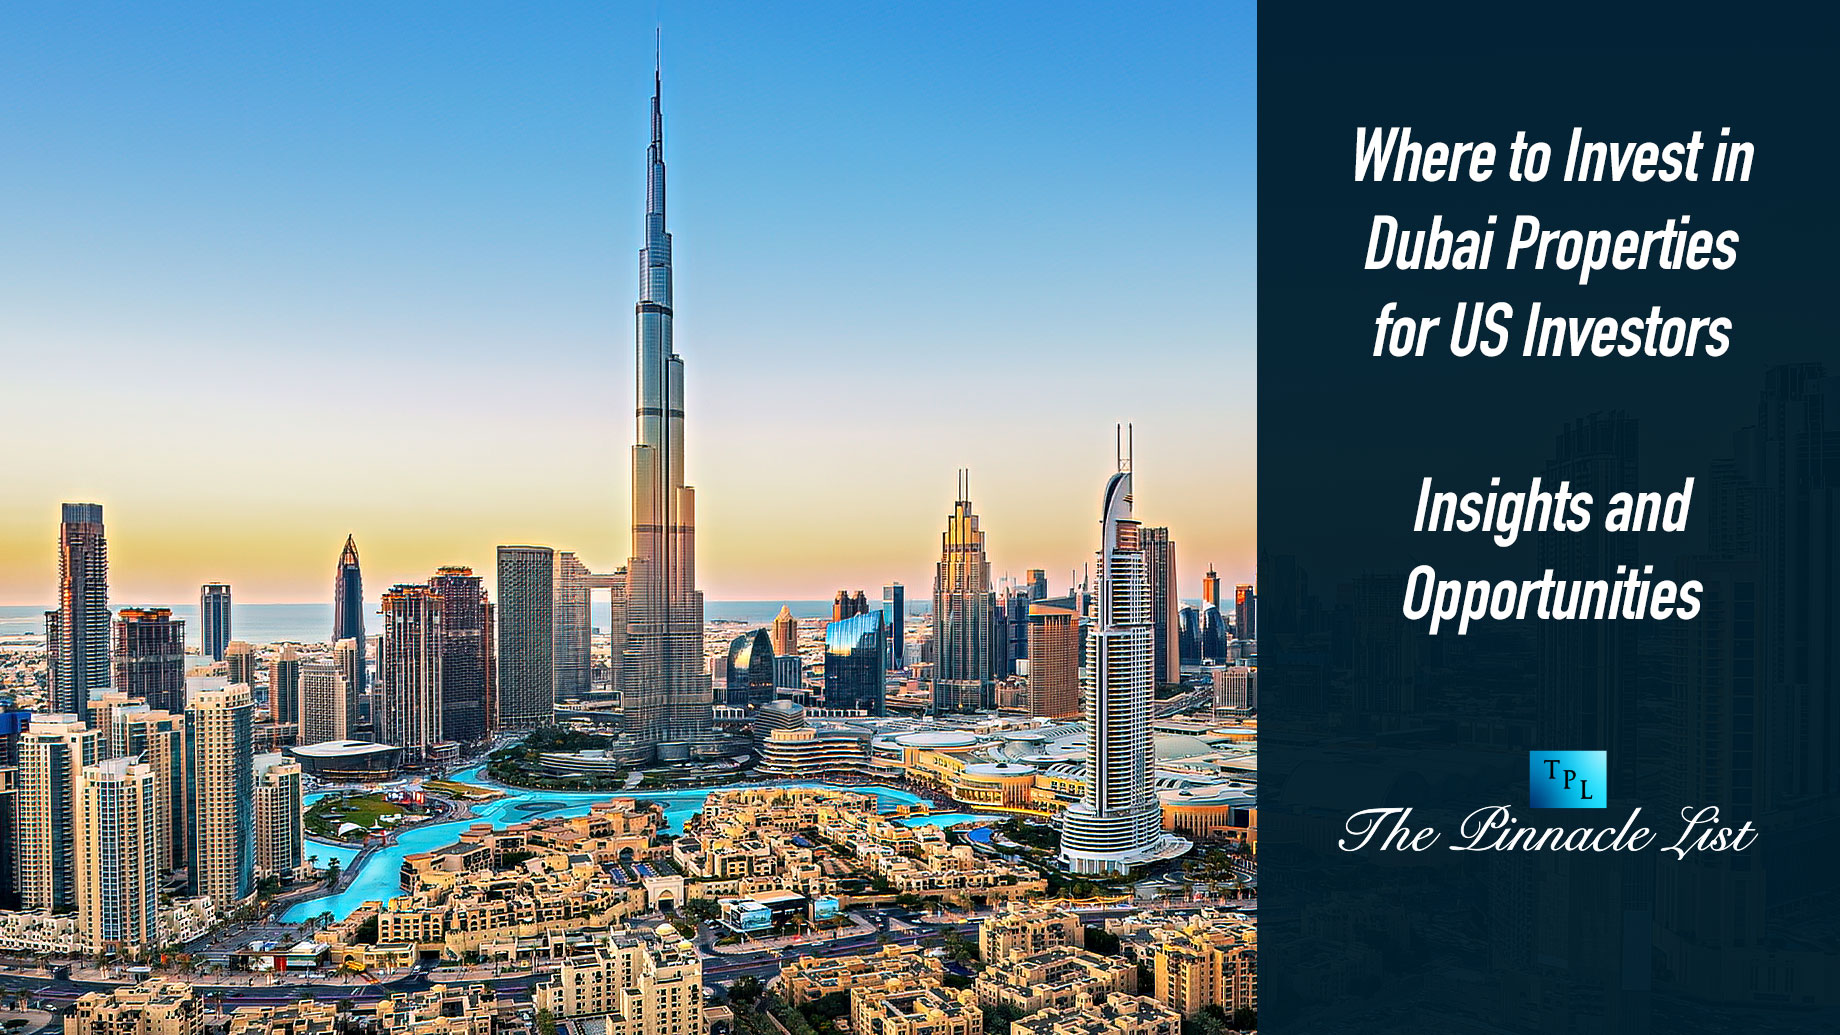 Where to Invest in Dubai Properties for US Investors: Insights and Opportunities